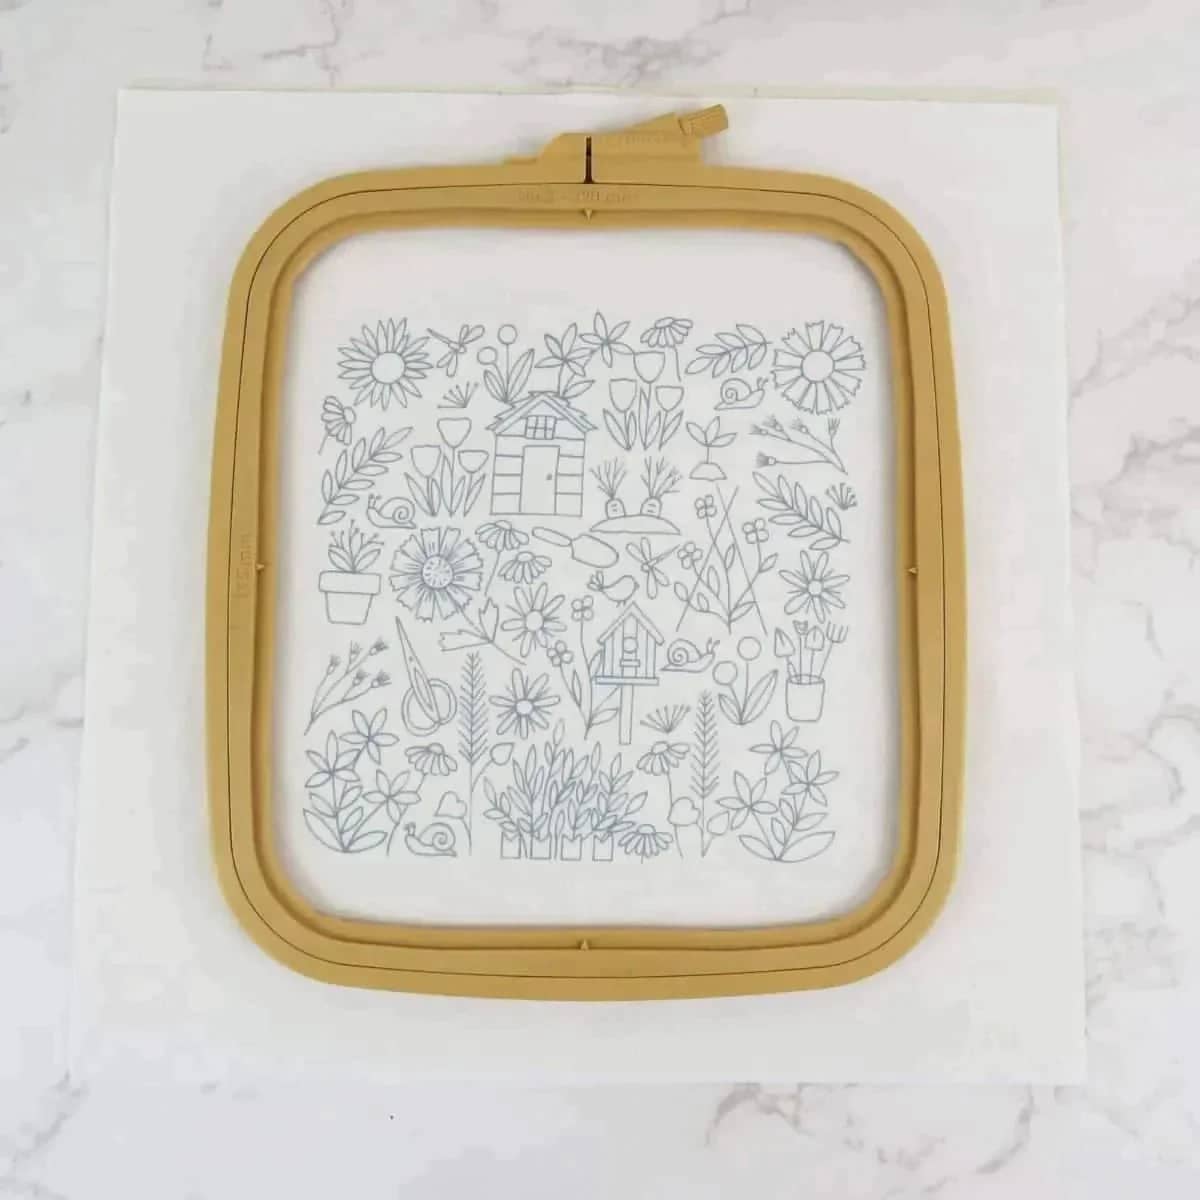 How does your Garden Grow Hand Embroidery Kit, Embroidery Kit, StitchDoodles, A Walk in the Woods - stitchdoodles, creative, Embroidery, embroidery hoop, Embroidery Kit, embroidery pattern, garden embroidery, hand embroidery, hand embroidery fabric, hand embroidery kit, hand embroidery seat frame, nurge embroidery hoop, nurge square hoops, pattern, patterns, Printed Pattern, StitchDoodles, stitched, stitching, wildlife embroidery, StitchDoodles, shop.stitchdoodles.com